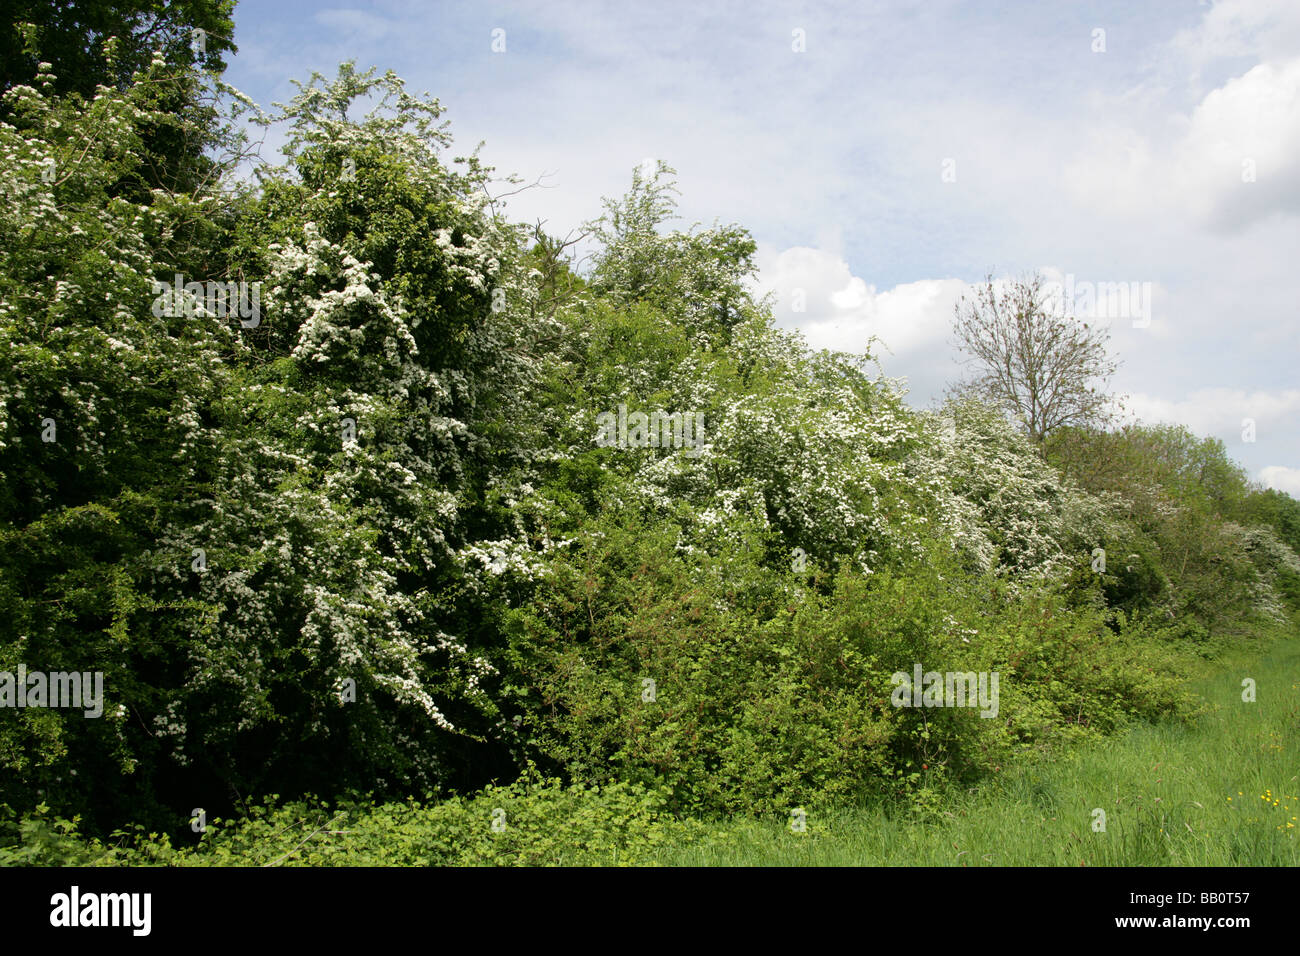 A Country Hedgerow in the UK in May Stock Photo